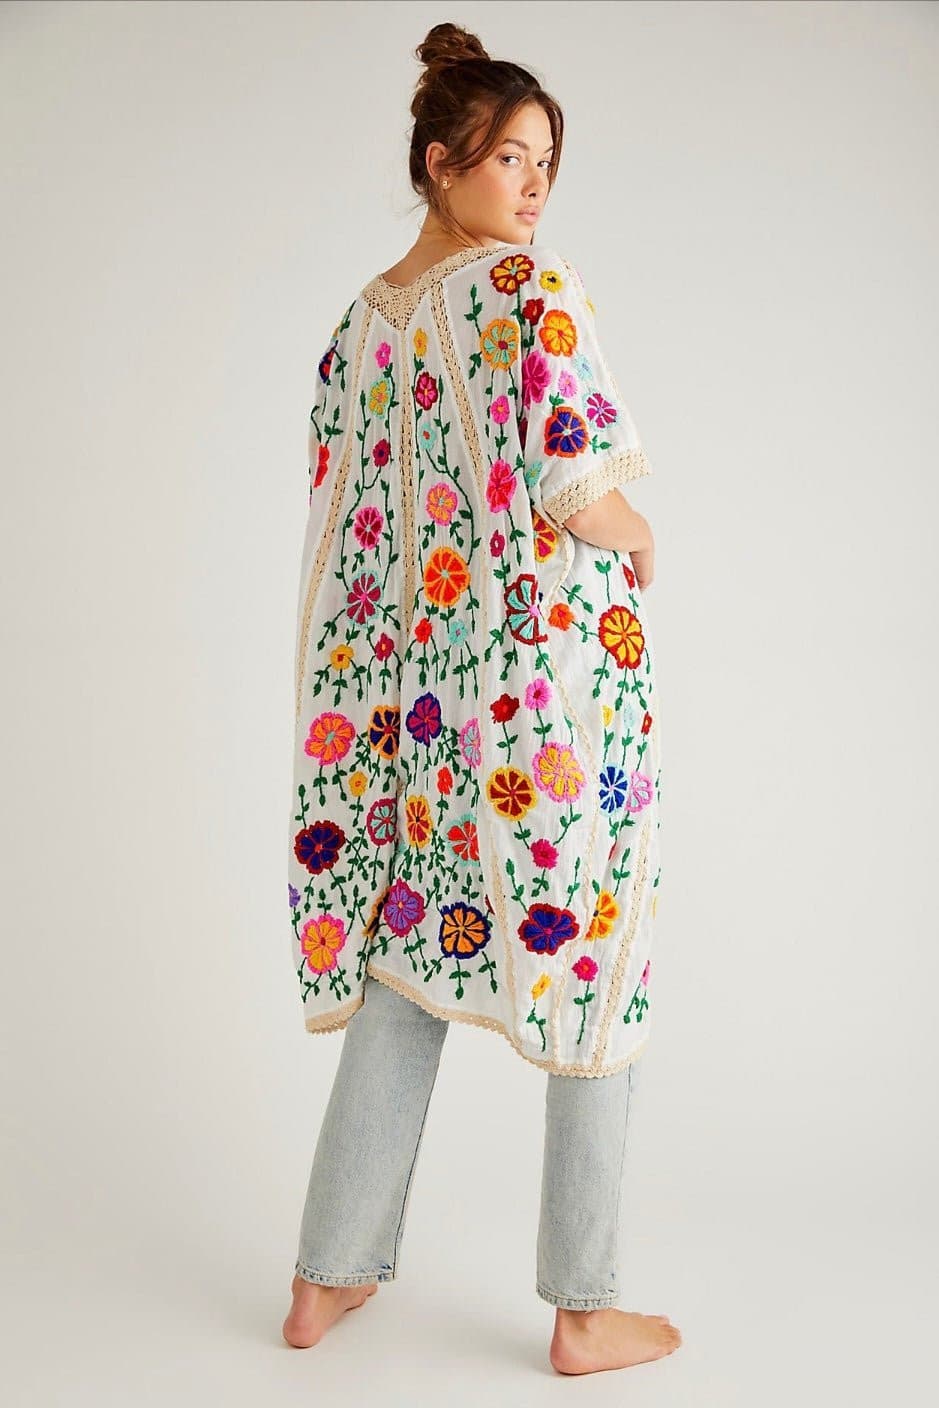 BELLA FLOR EMBROIDERED CAFTAN X FREE PEOPLE - MOMO STUDIO BERLIN - Berlin Concept Store - sustainable & ethical fashion